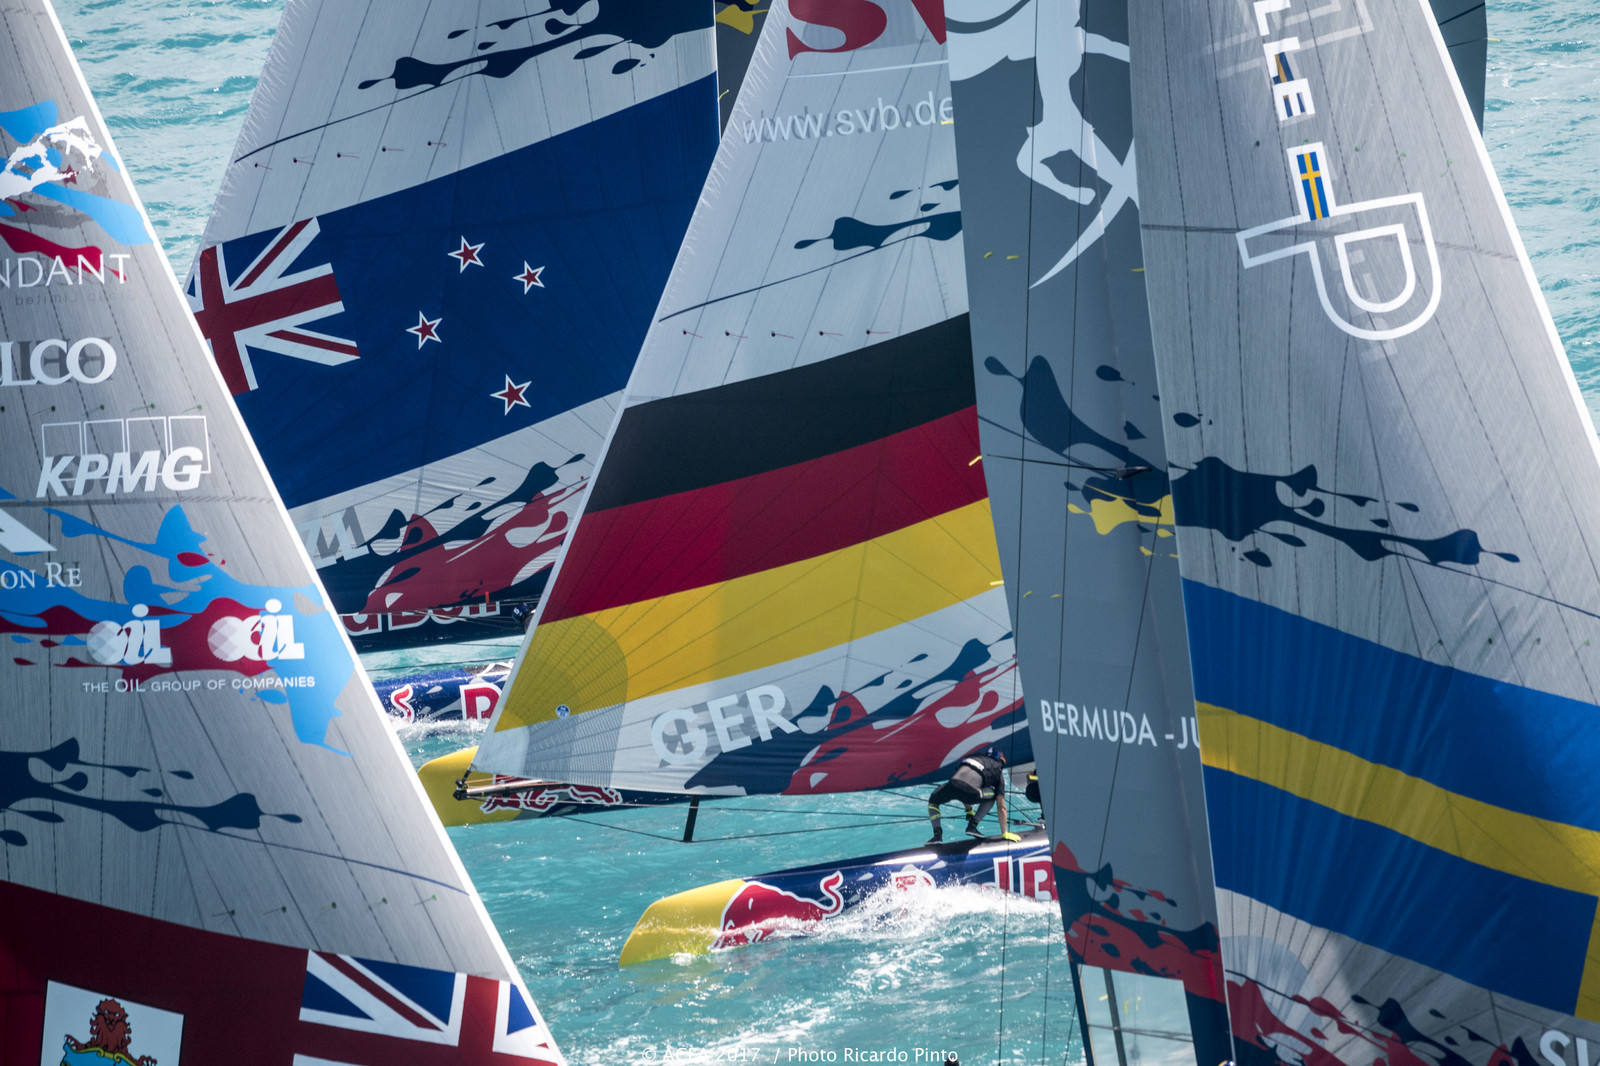 Red Bull Youth America’s Cup Cats Go BIG with North Graphics!